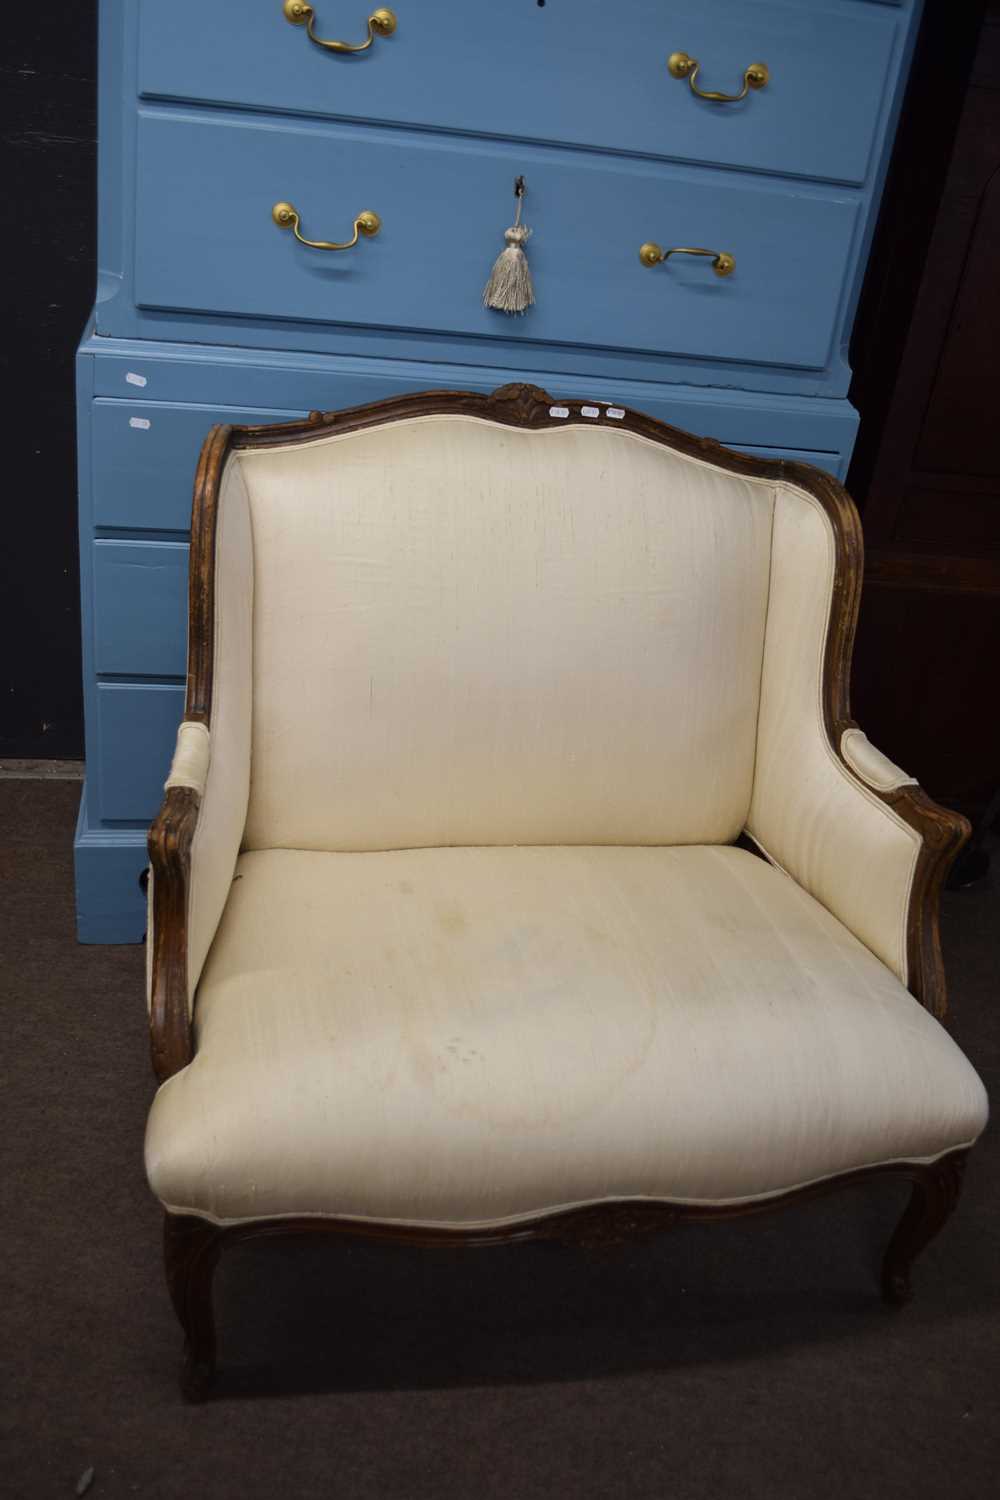 Late 19th/early 20th century Continental cherry wood framed parlour armchair upholstered in cream - Image 3 of 3